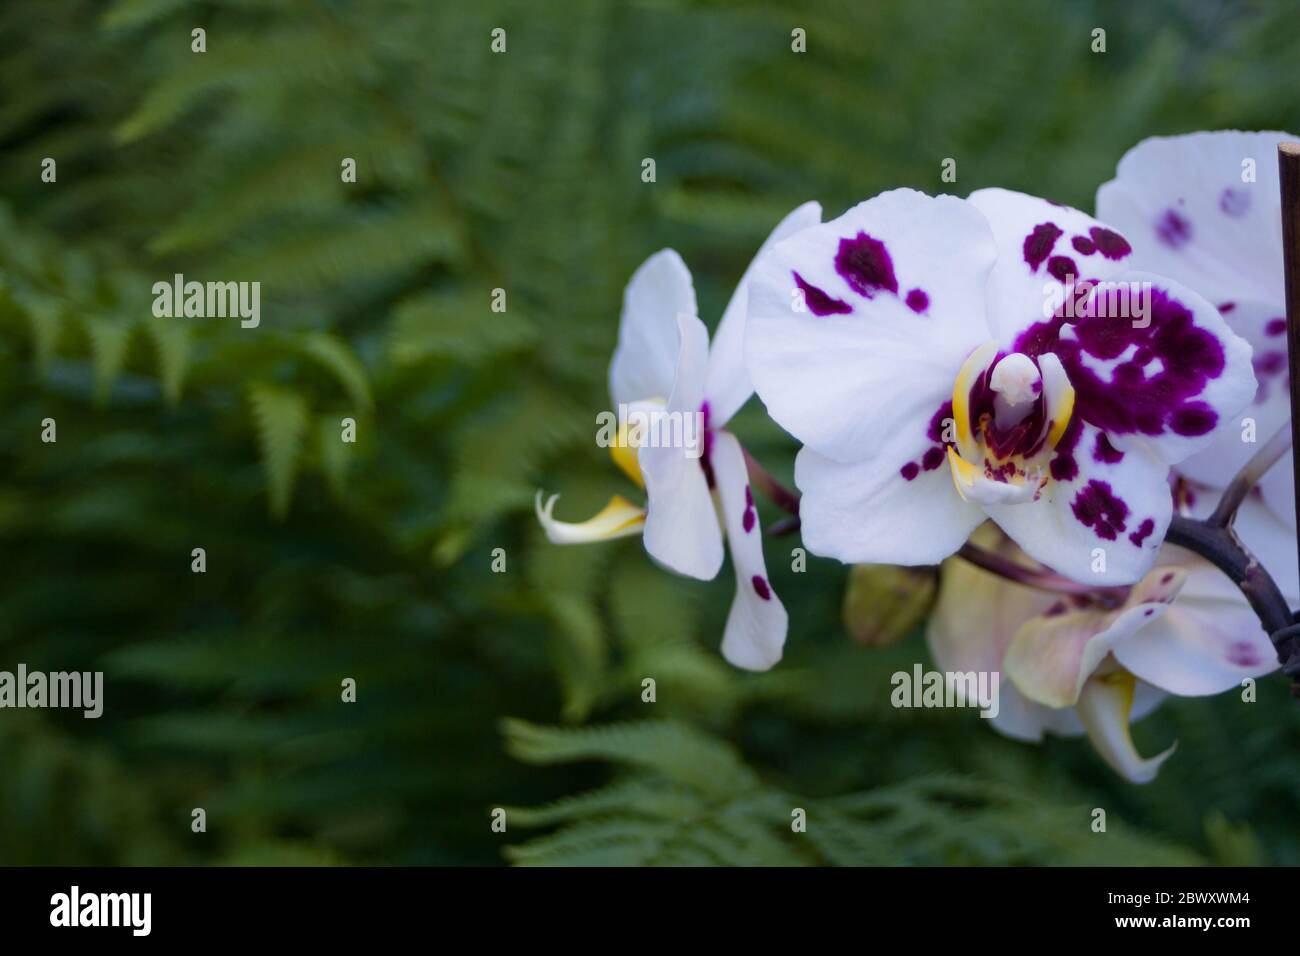 Beautiful purple spotted white orchids in front of green ferny background Stock Photo